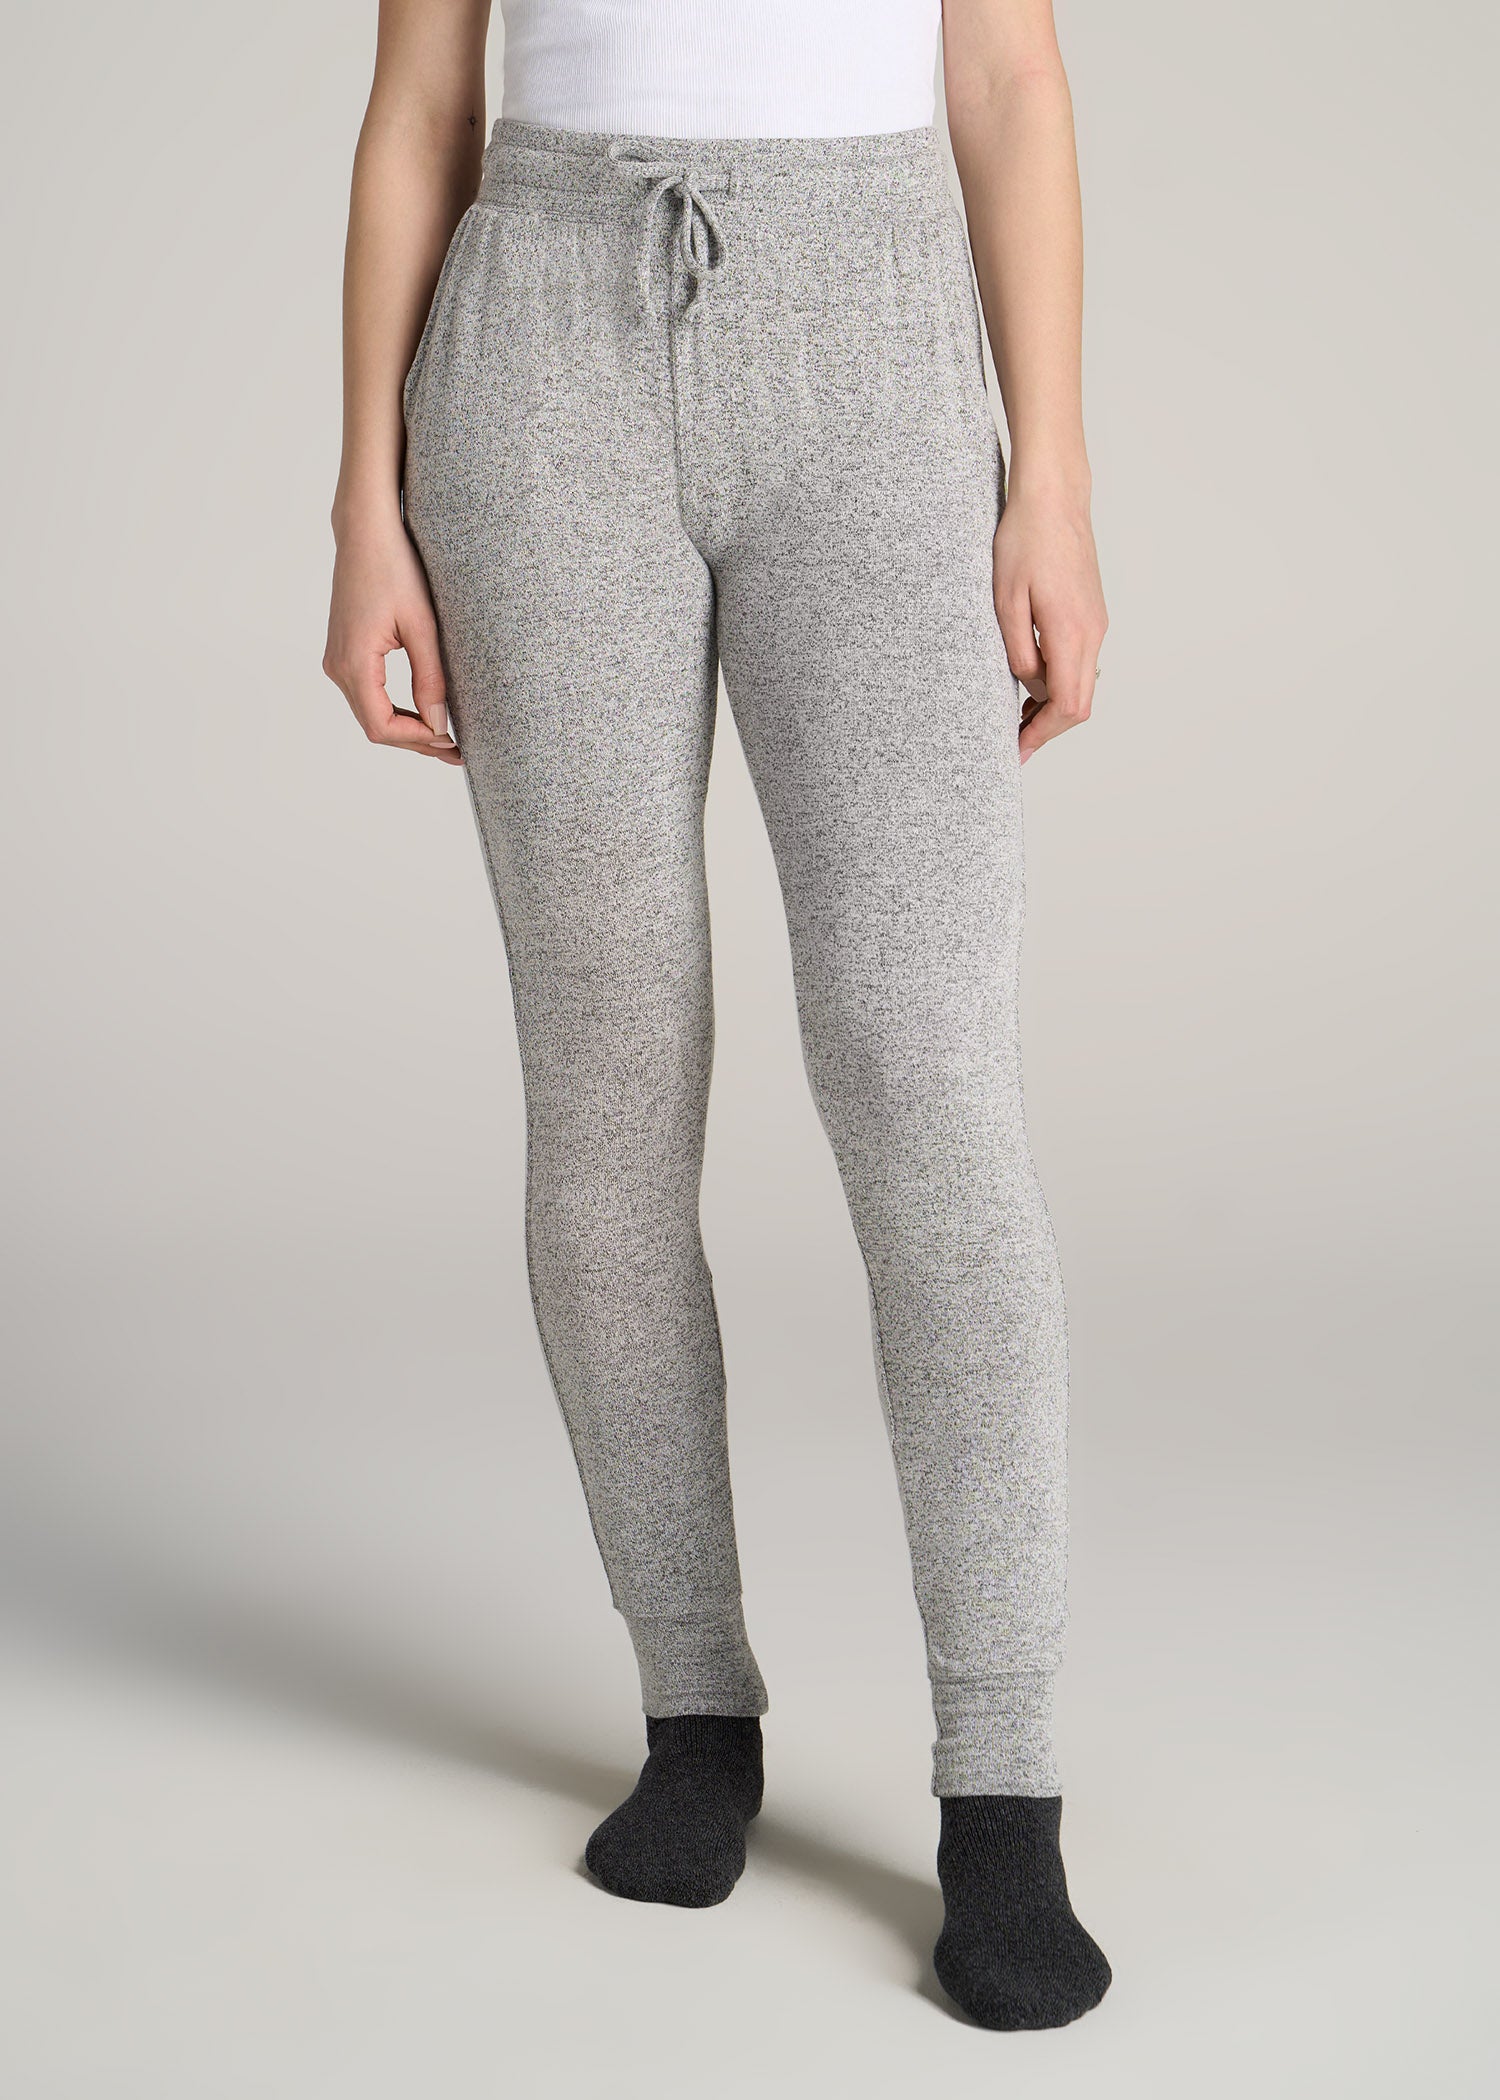 Cozy Lounge Joggers for Tall Women in Grey Mix